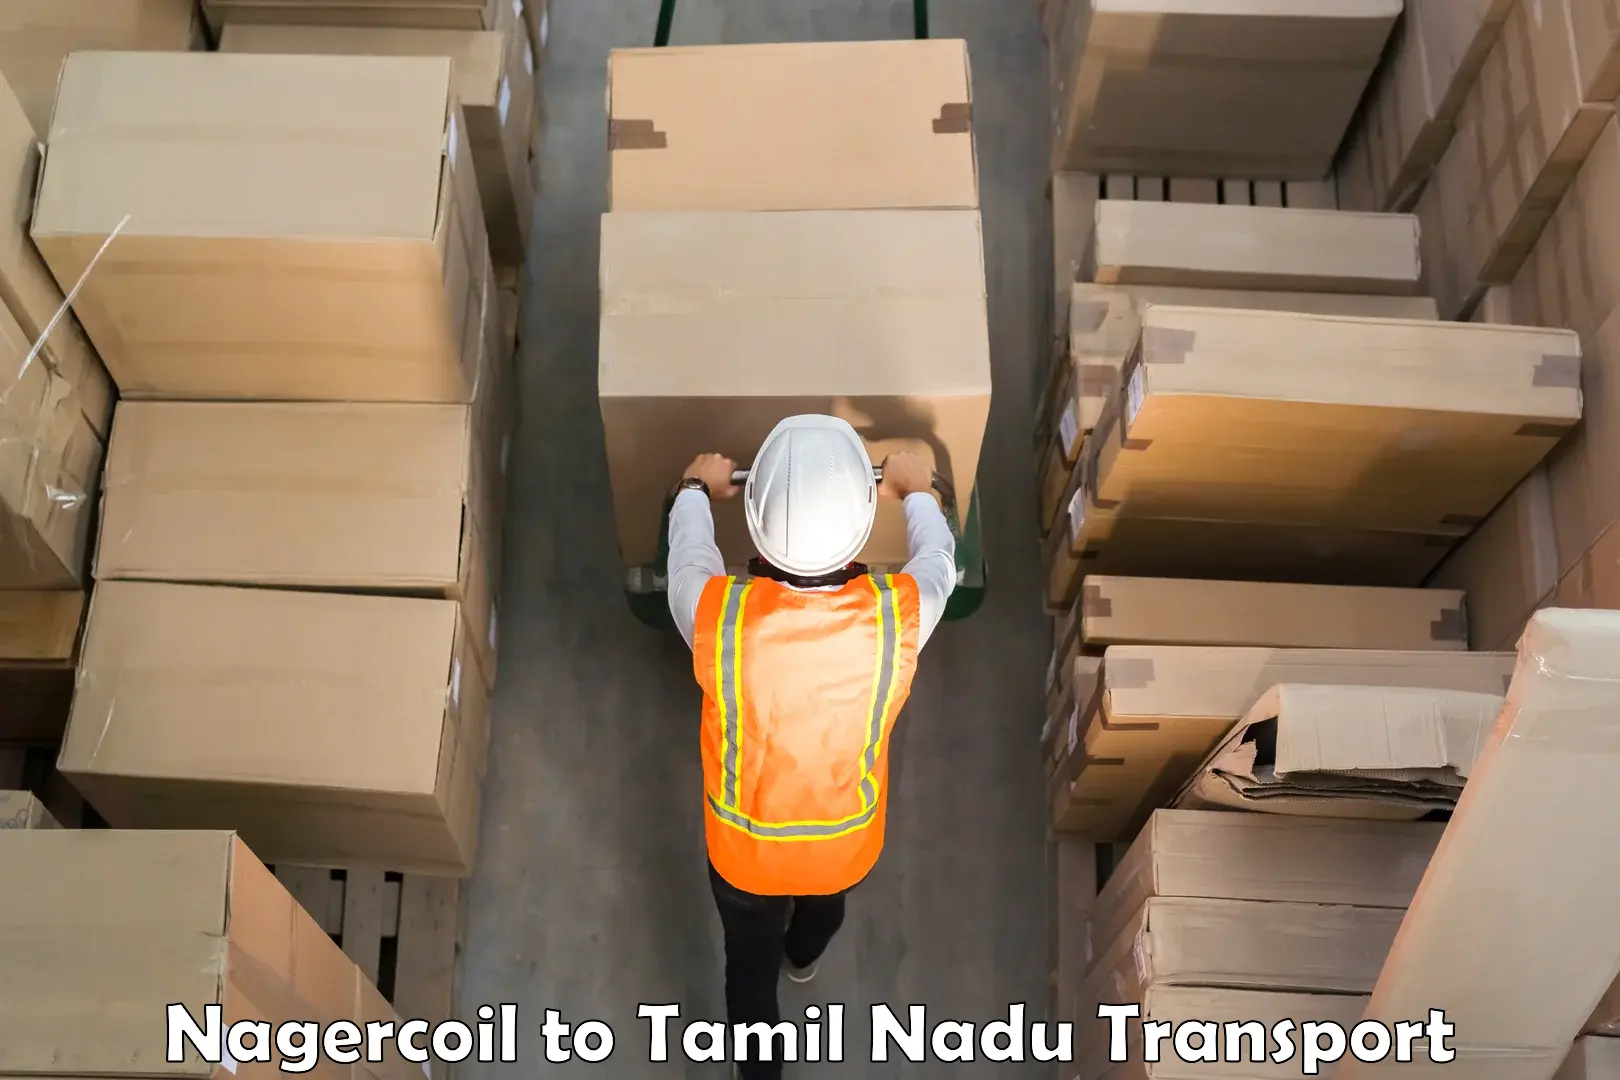 Container transport service Nagercoil to Chidambaram